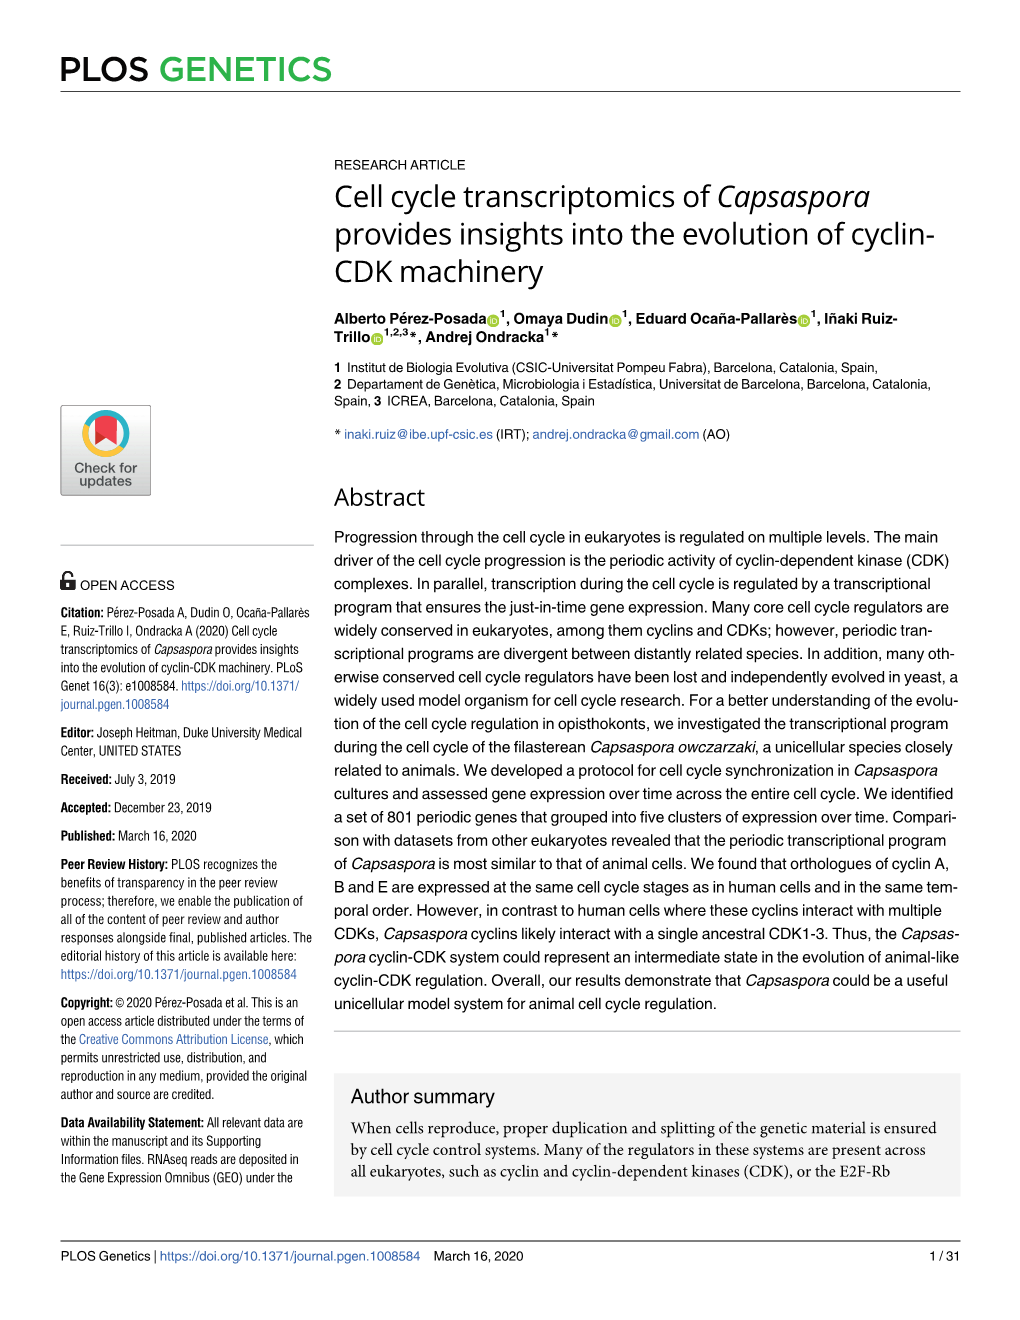 Cell Cycle Transcriptomics of Capsaspora Provides Insights Into the Evolution of Cyclin- CDK Machinery